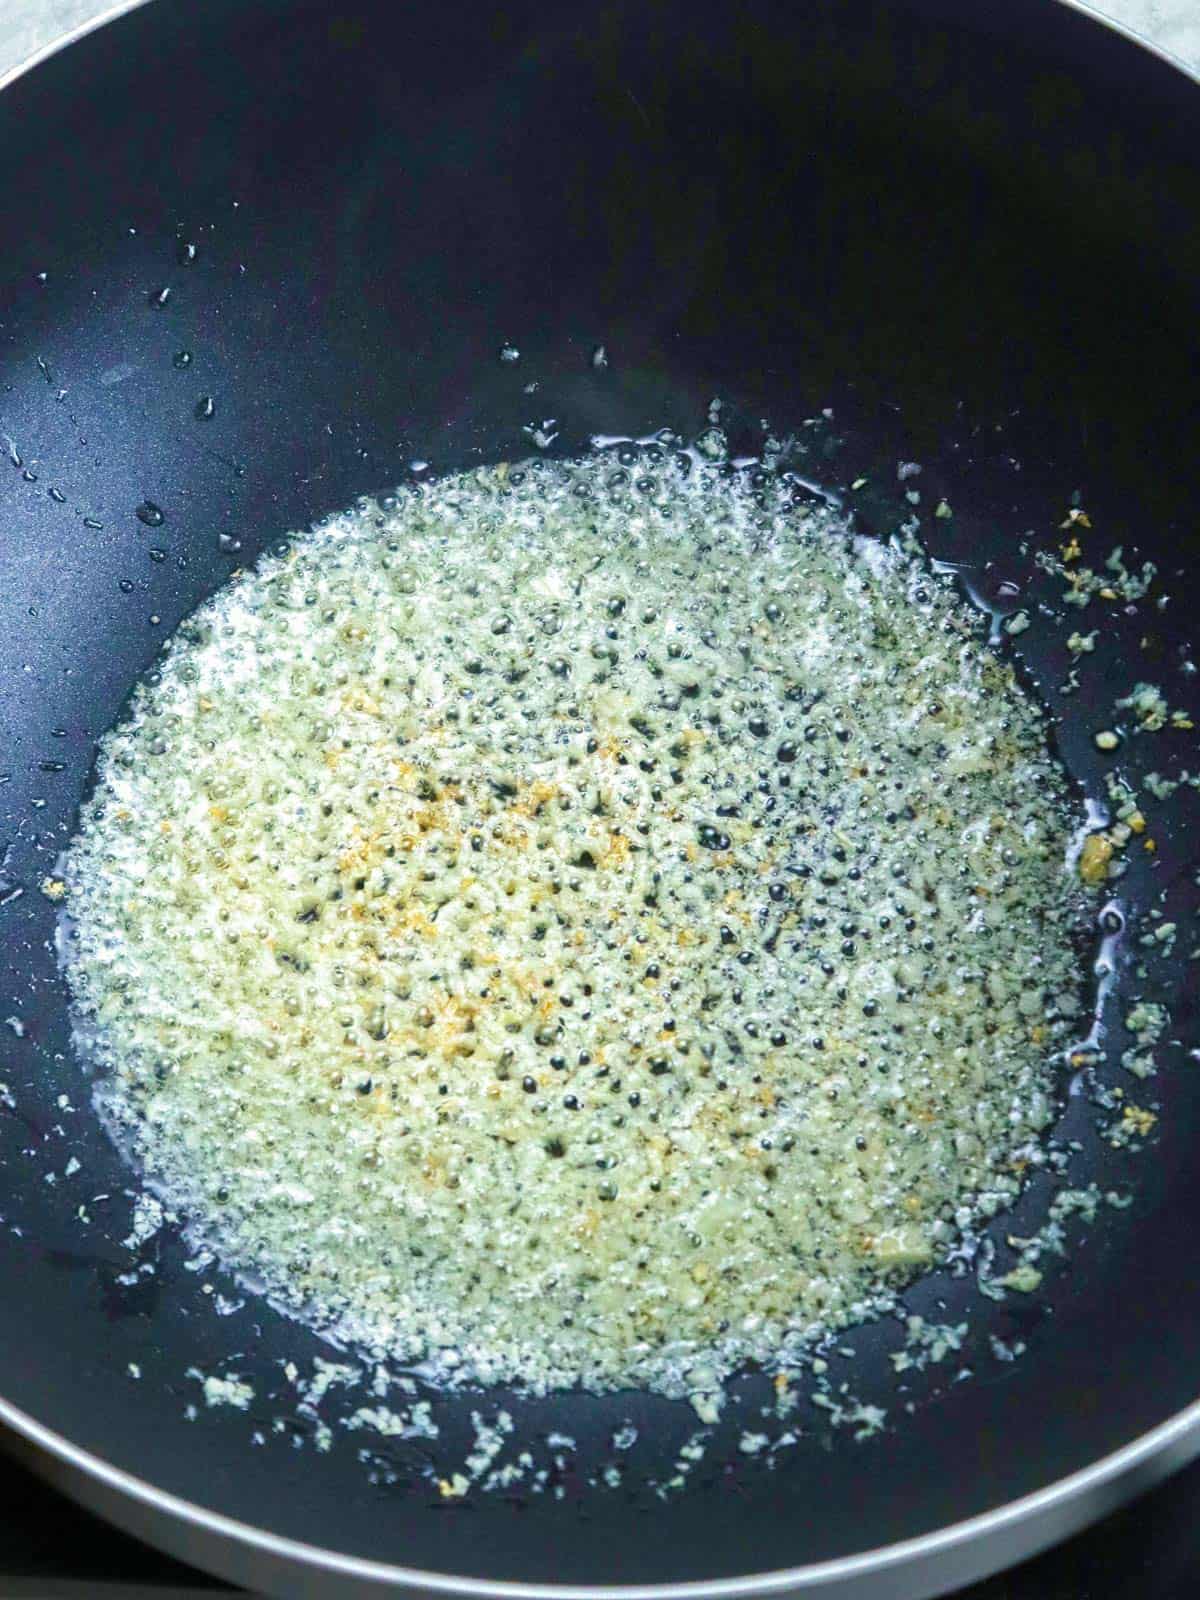 browning chopped garlic in oil in a pan